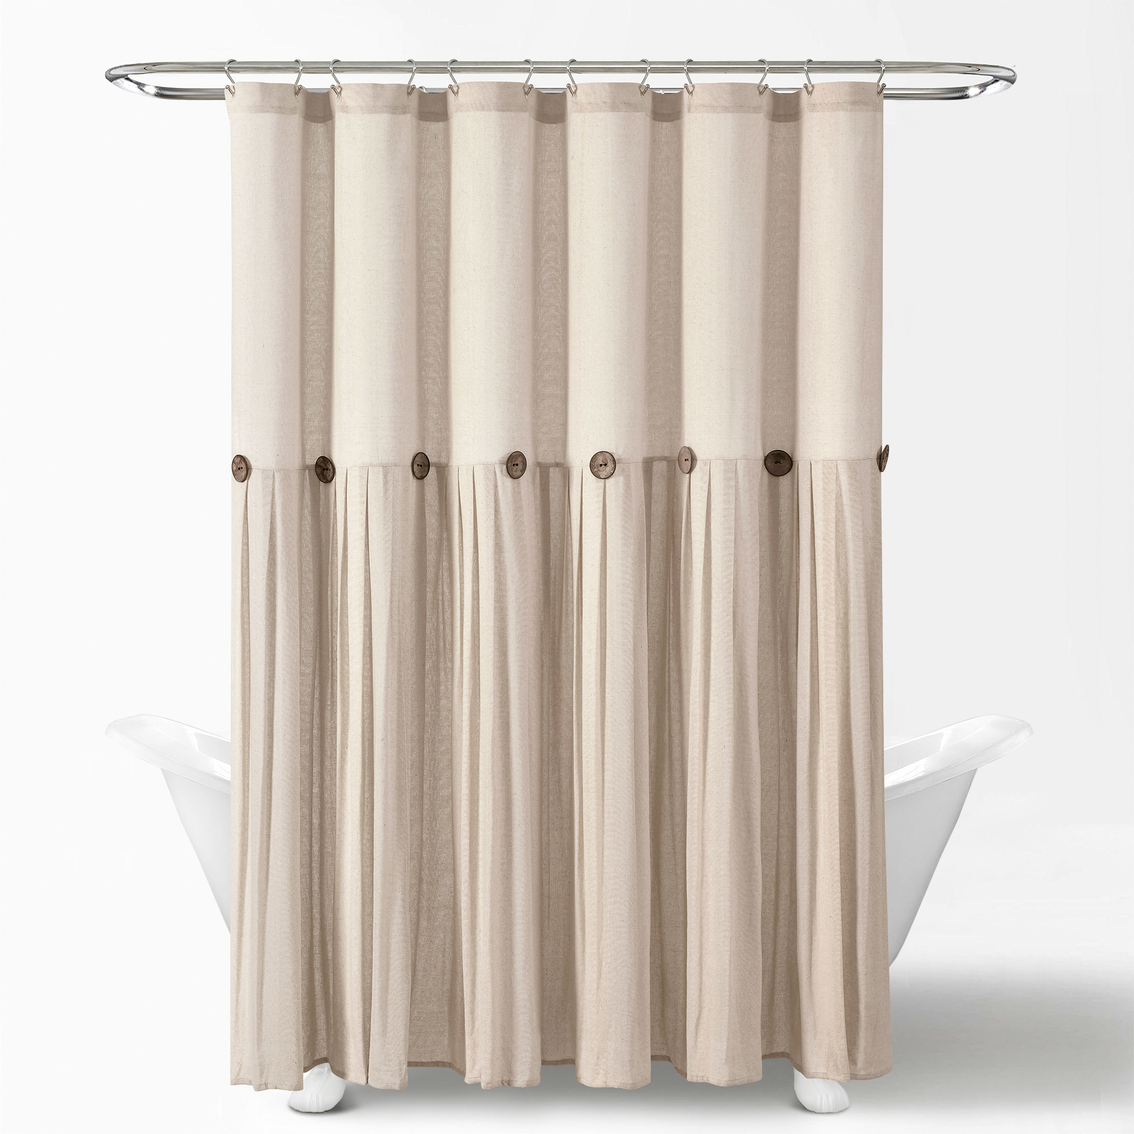 Lush Decor Linen Button Single Shower Curtain 72 x 72 in. - Image 5 of 7